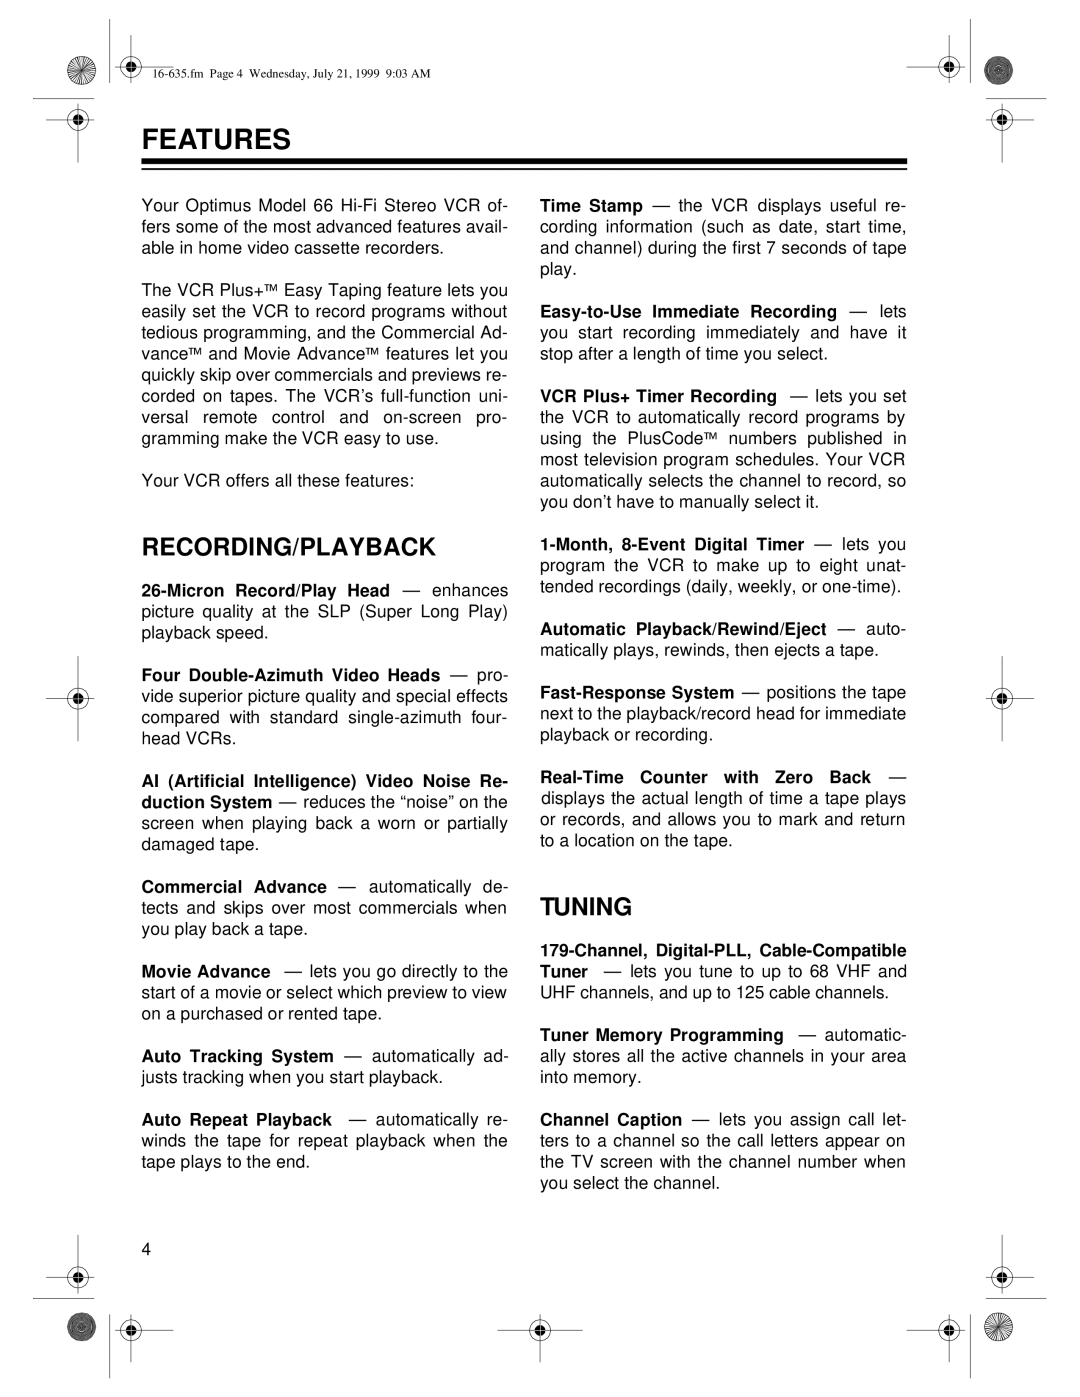 Radio Shack 66 owner manual Features, Recording/Playback, Tuning 